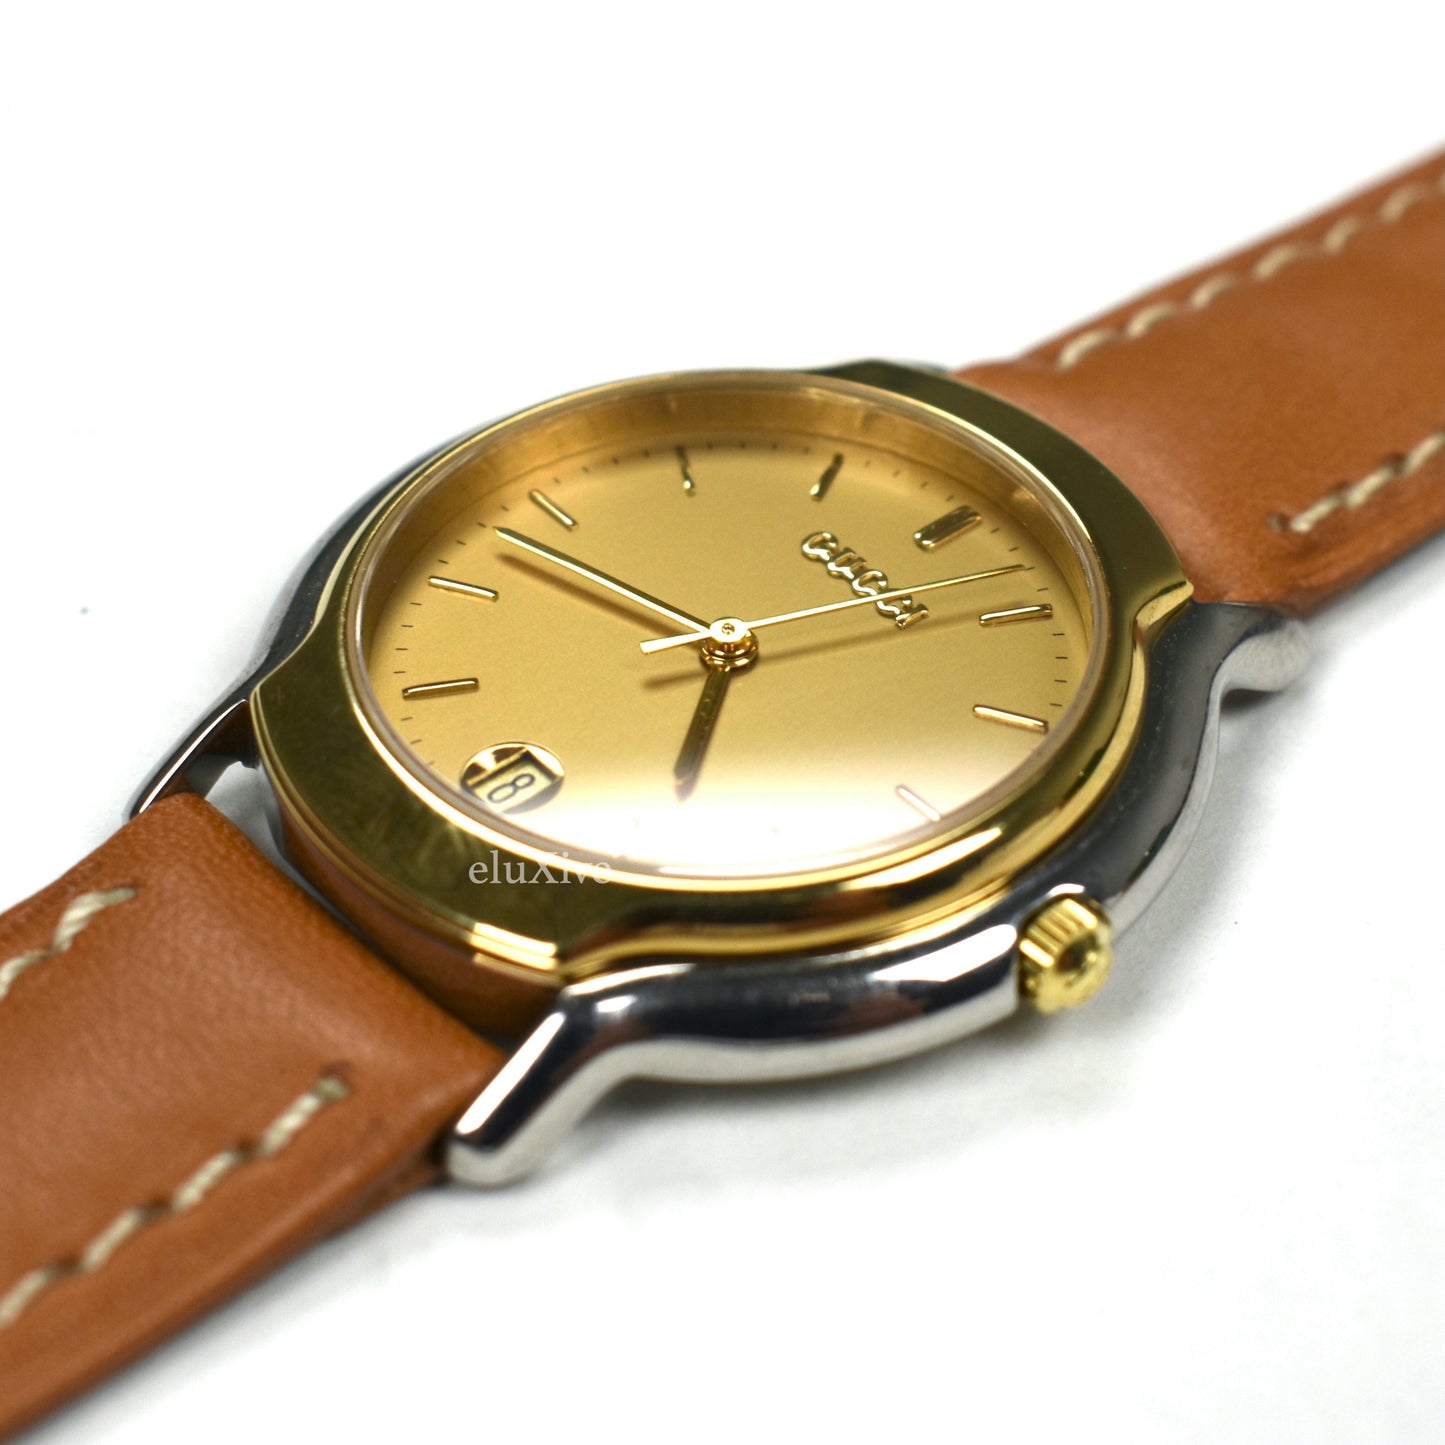 Gucci - 8000M Gold/Steel Champagne Dial Watch